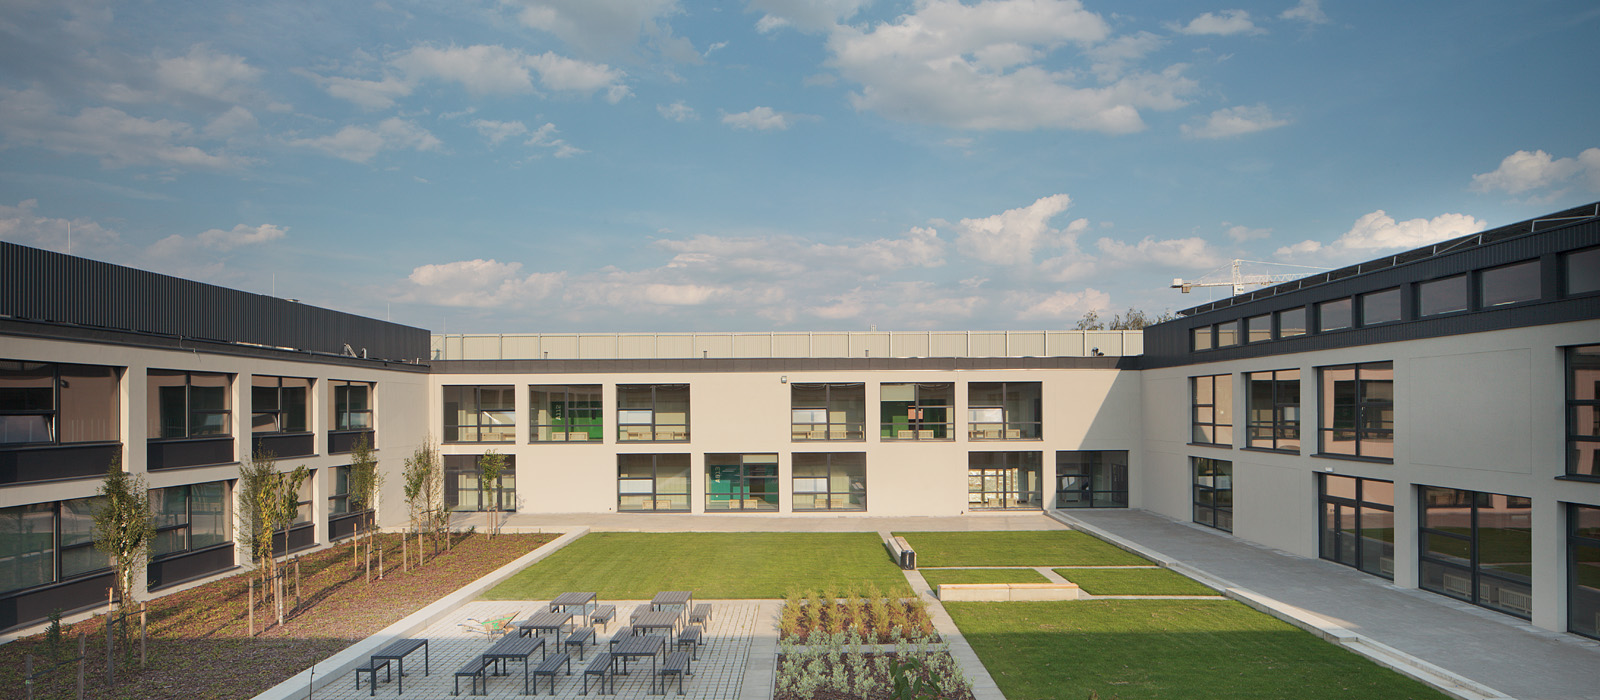 ch+ school and kindergarten in Wrocław – competition (1st prize)